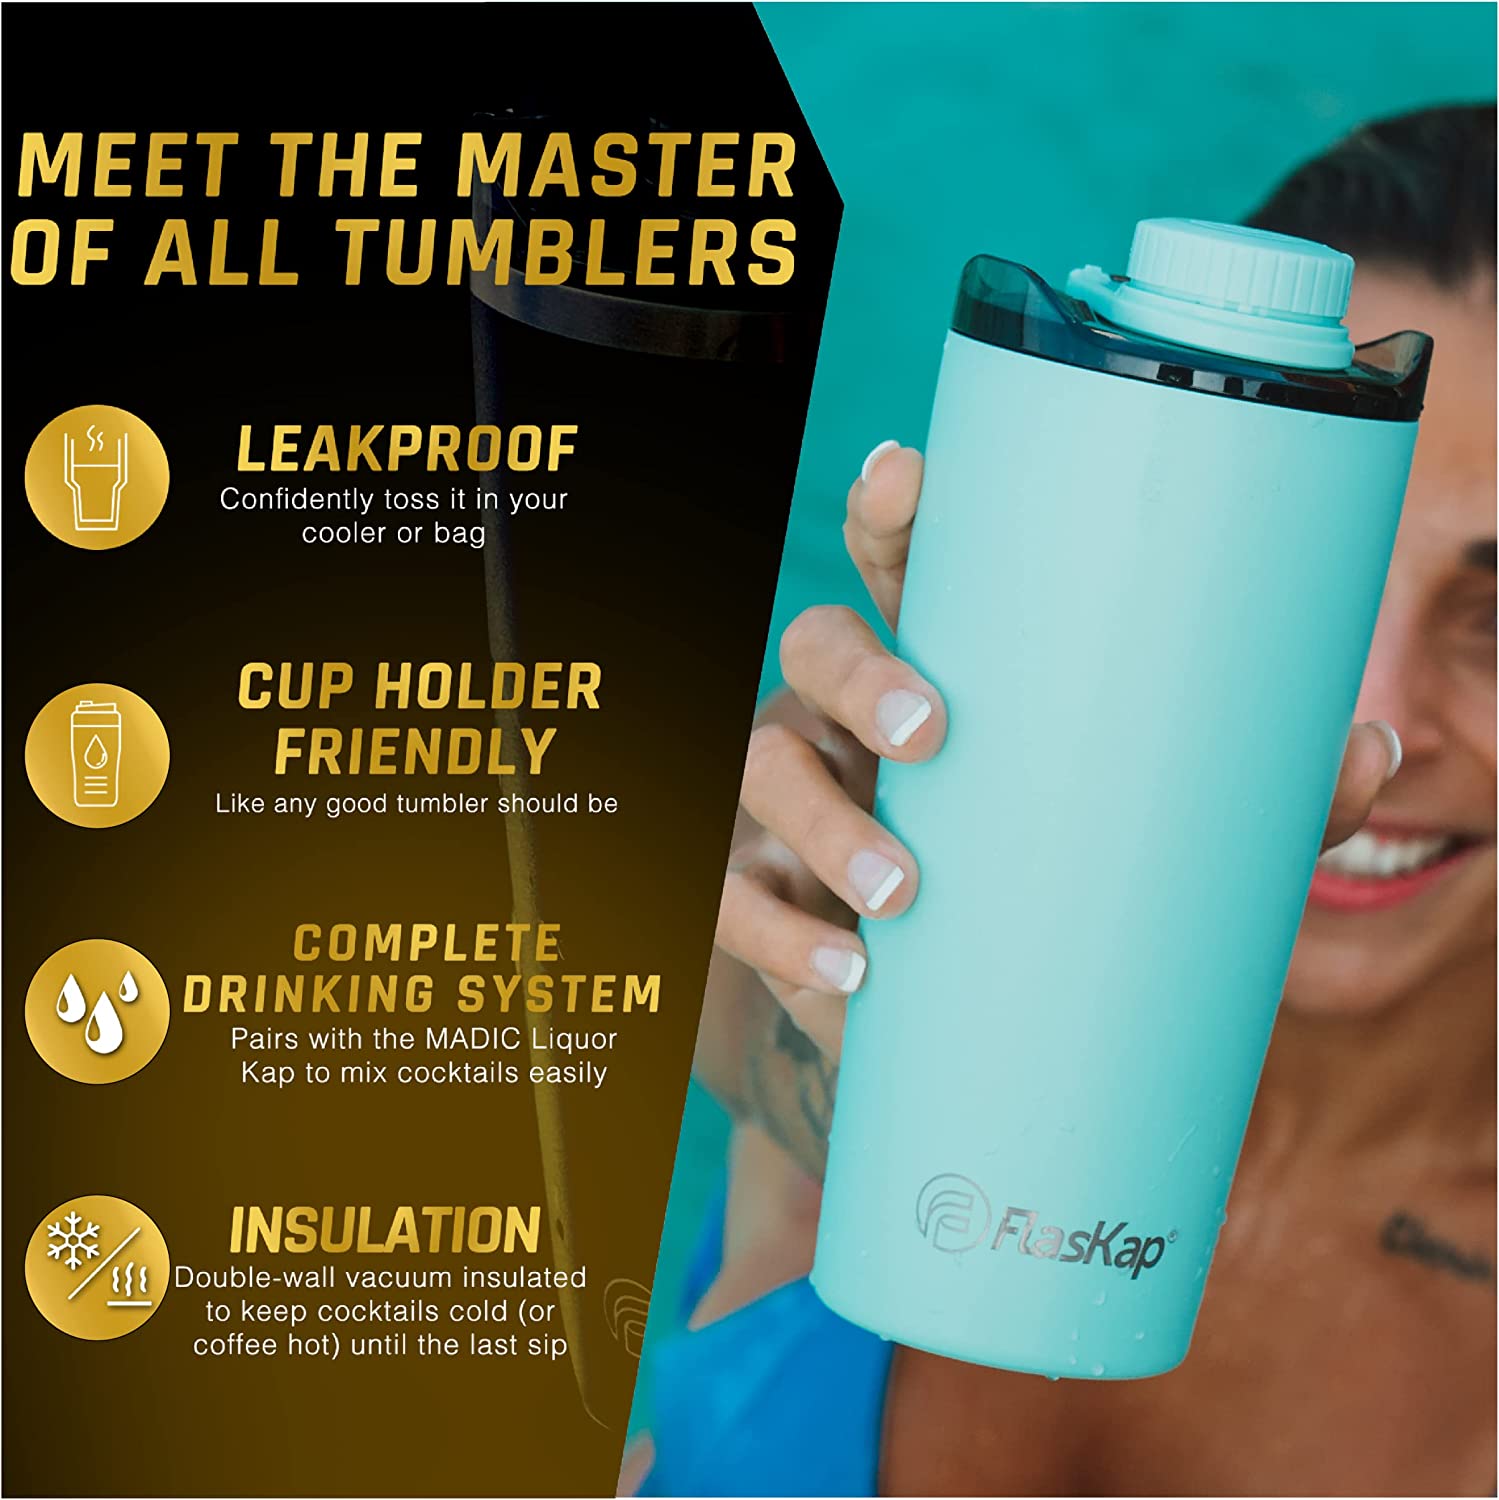 https://discounttoday.net/wp-content/uploads/2022/12/FlasKap-VOLST-30-Insulated-Tumbler-with-Standard-Lid-Double-Wall-Vacuum-Insulated-Leak-Proof-Cup-Holder-Friendly-Fits-MADIC-9-30-oz-Seafoam-Green1.jpg